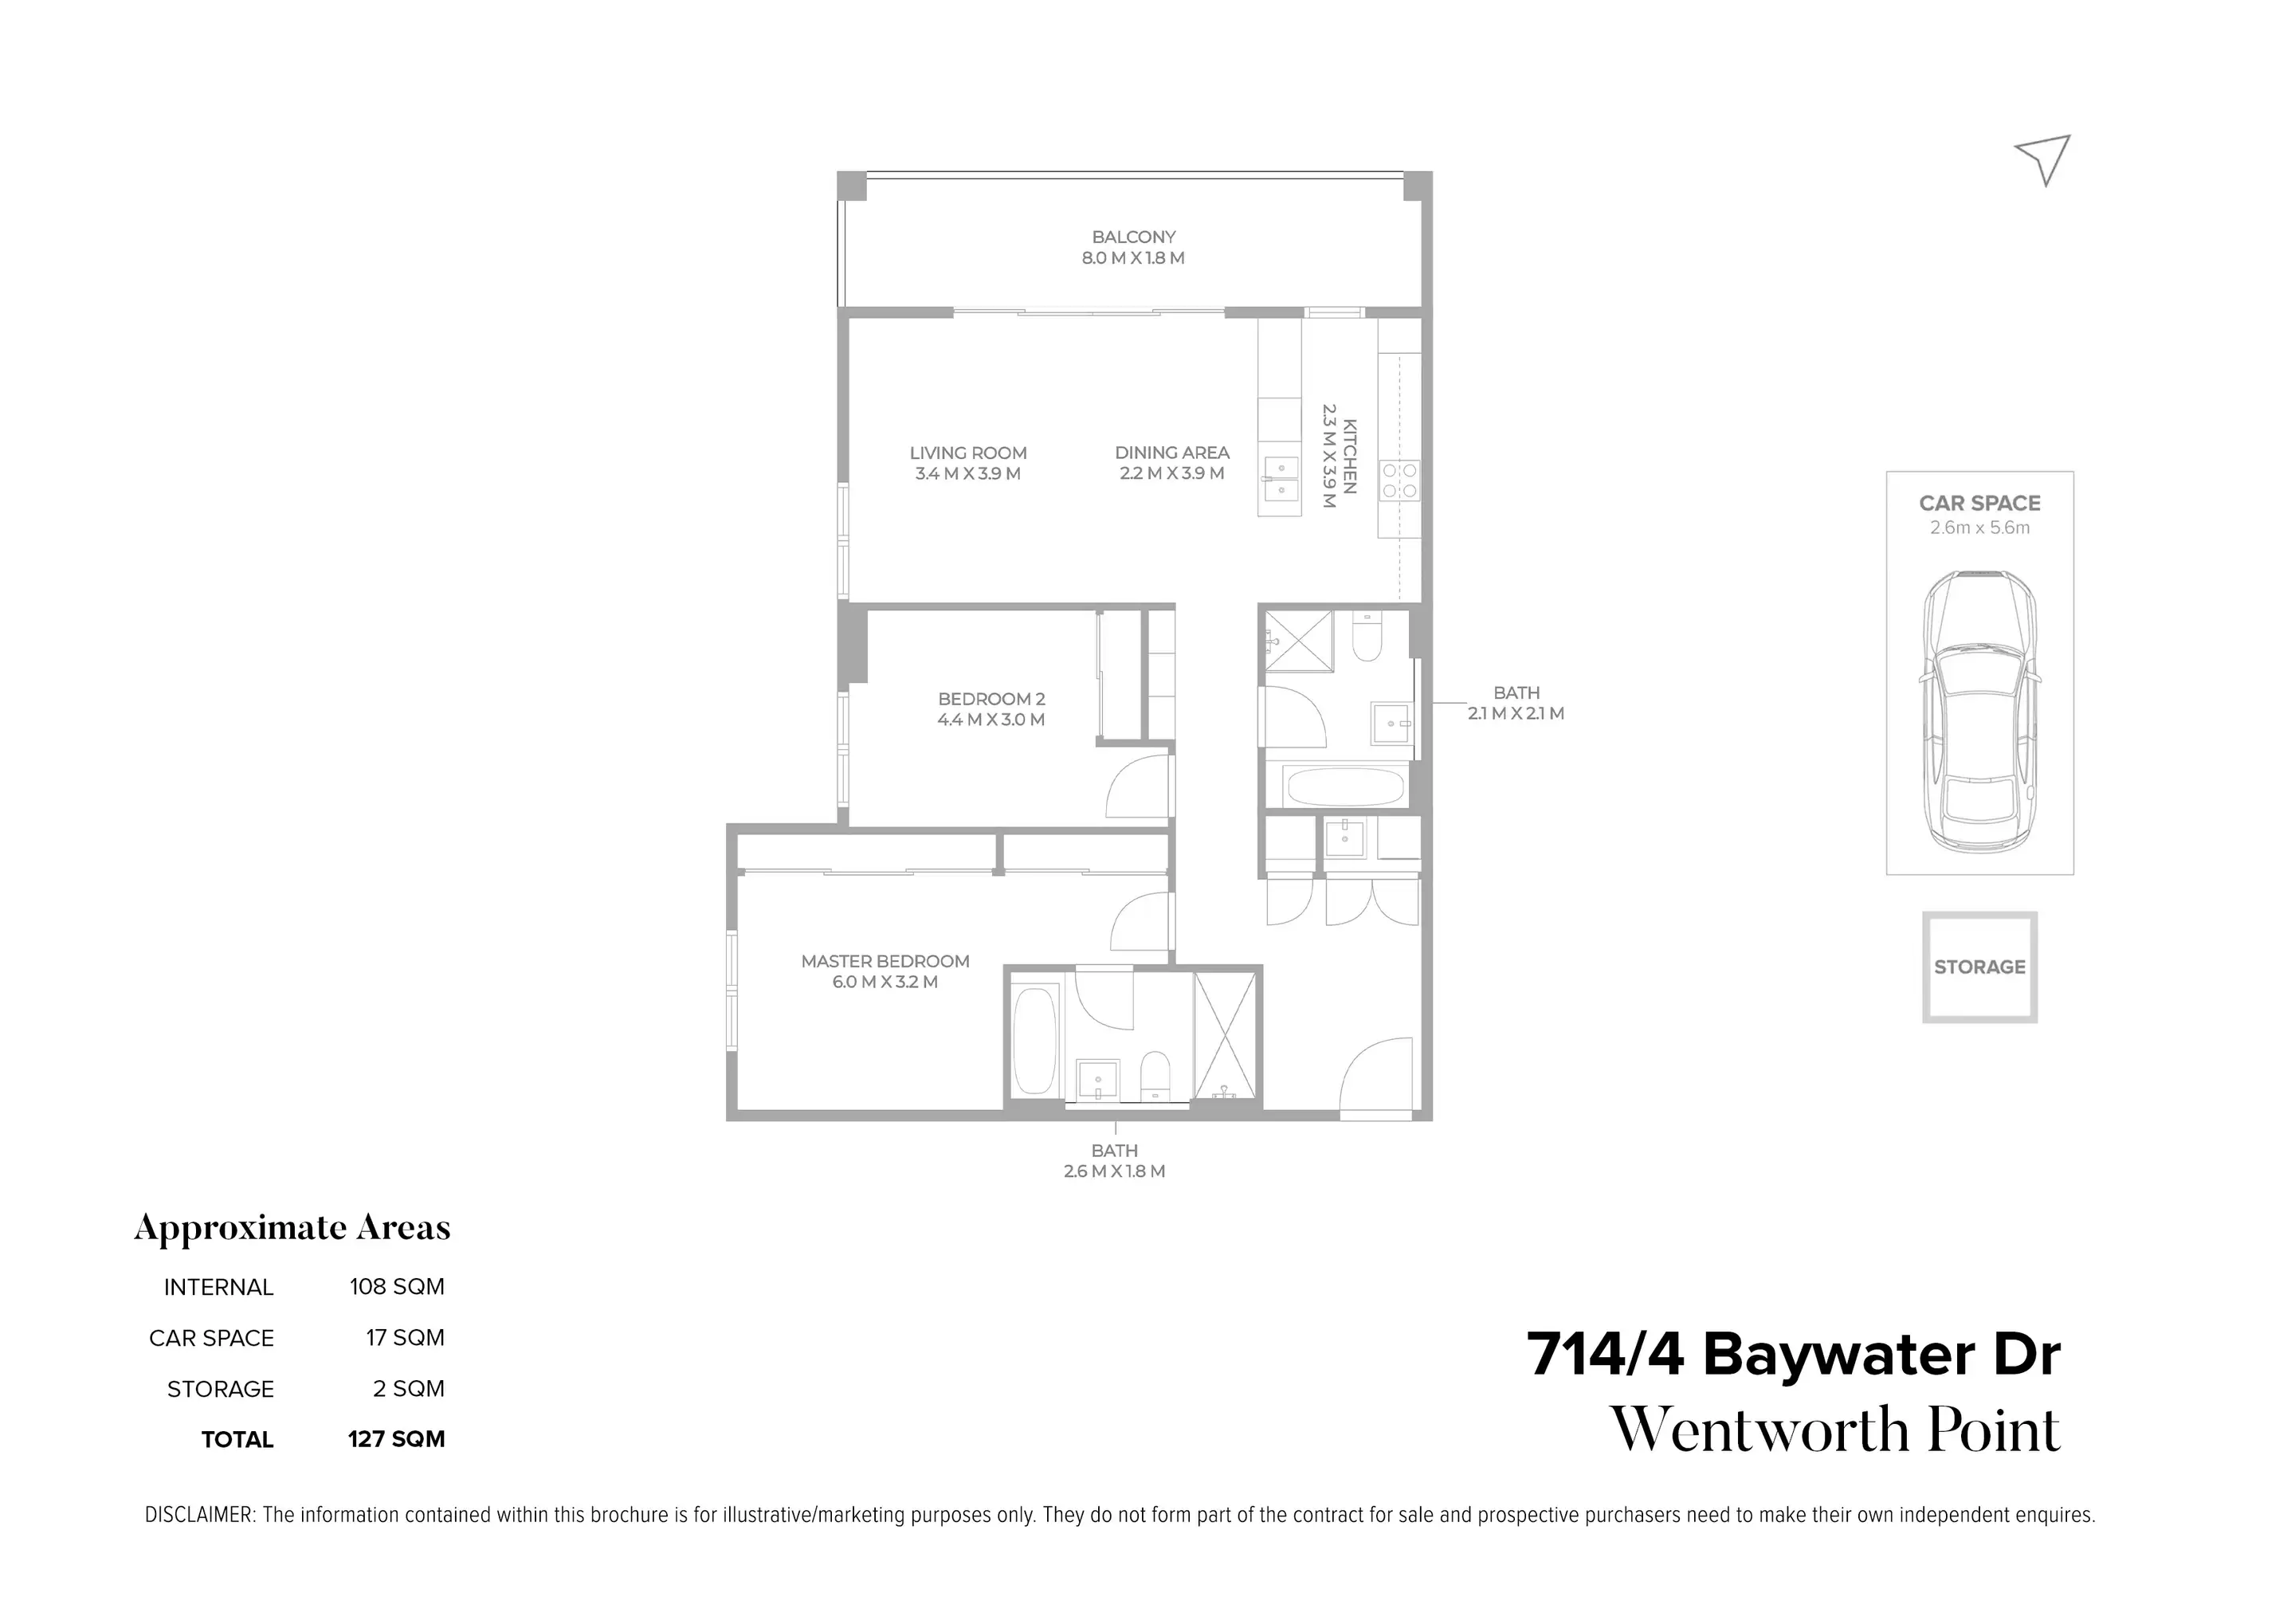 714/4 Baywater Drive, Wentworth Point Sold by Chidiac Realty - floorplan